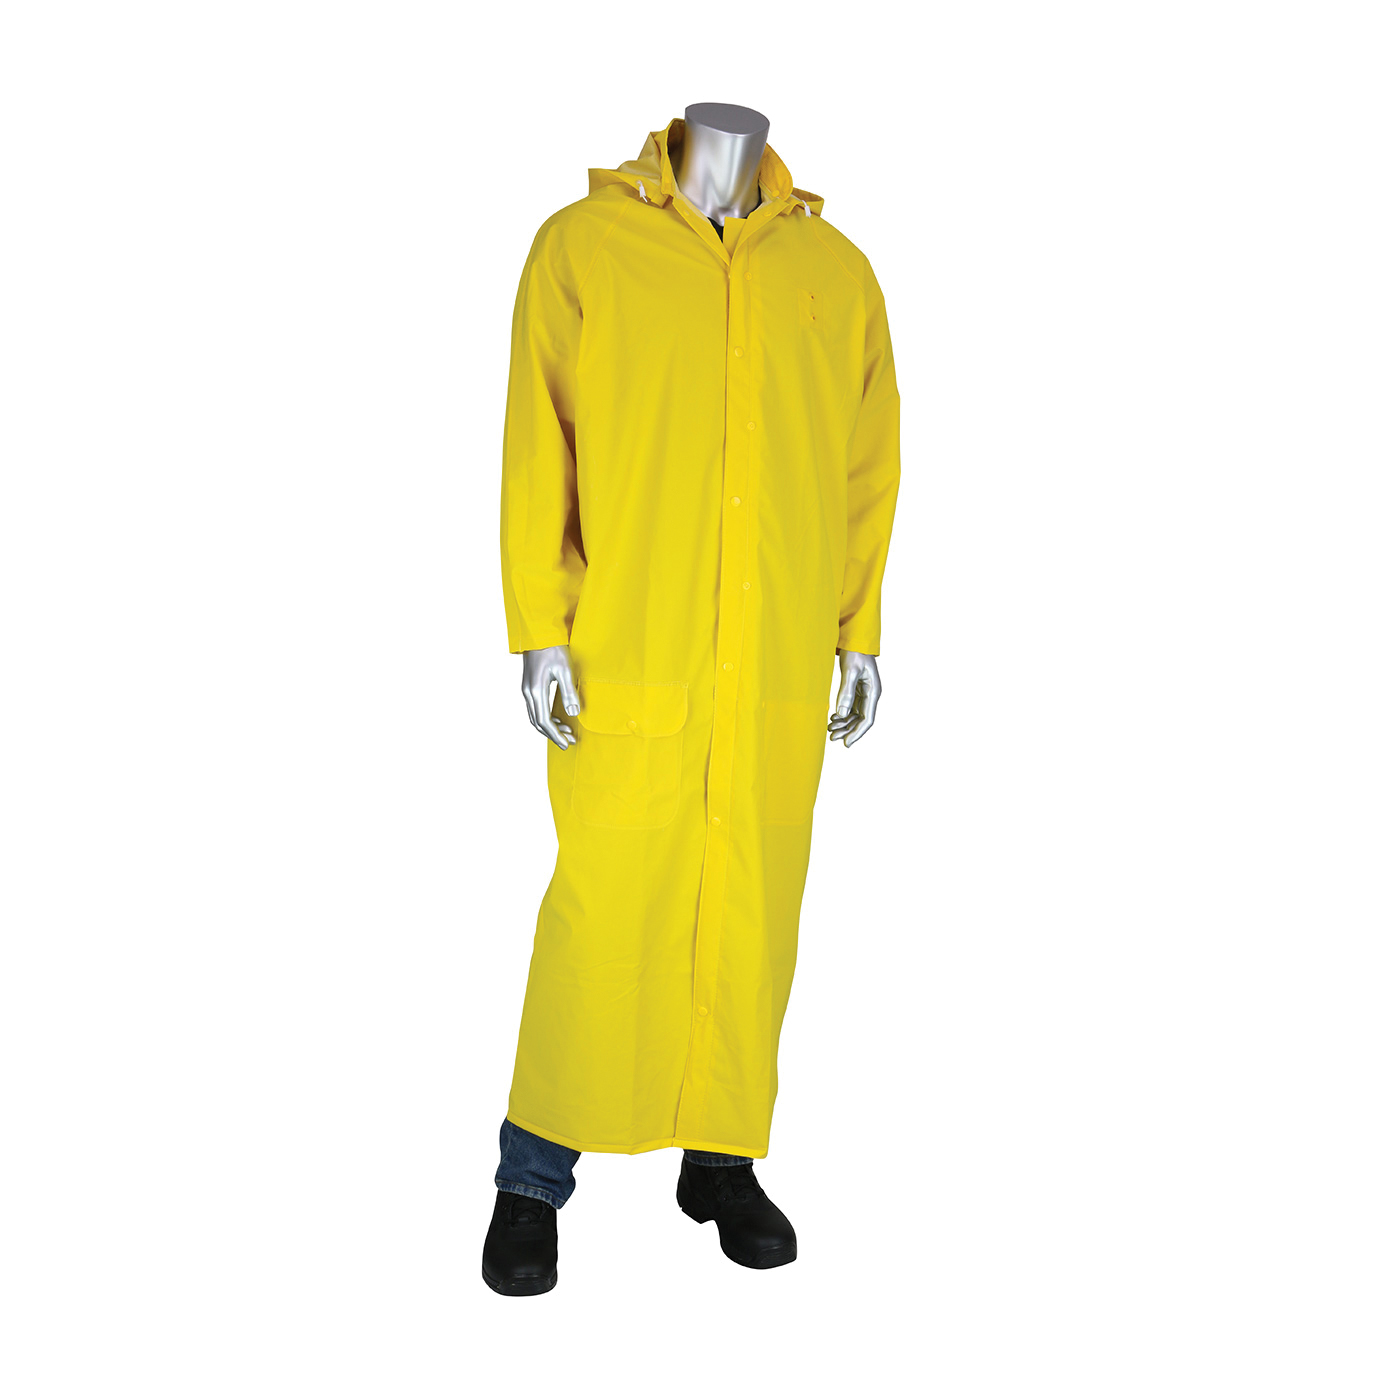 PIP® FALCON™ Base35FR™ 205-320FR/4X Premium Waterproof Duster Rain Coat With Limited Flammability, Unisex, 4XL, Yellow, Corduroy/Polyester/PVC, Resists: Flame and Water, Specifications Met: ASTM D6413